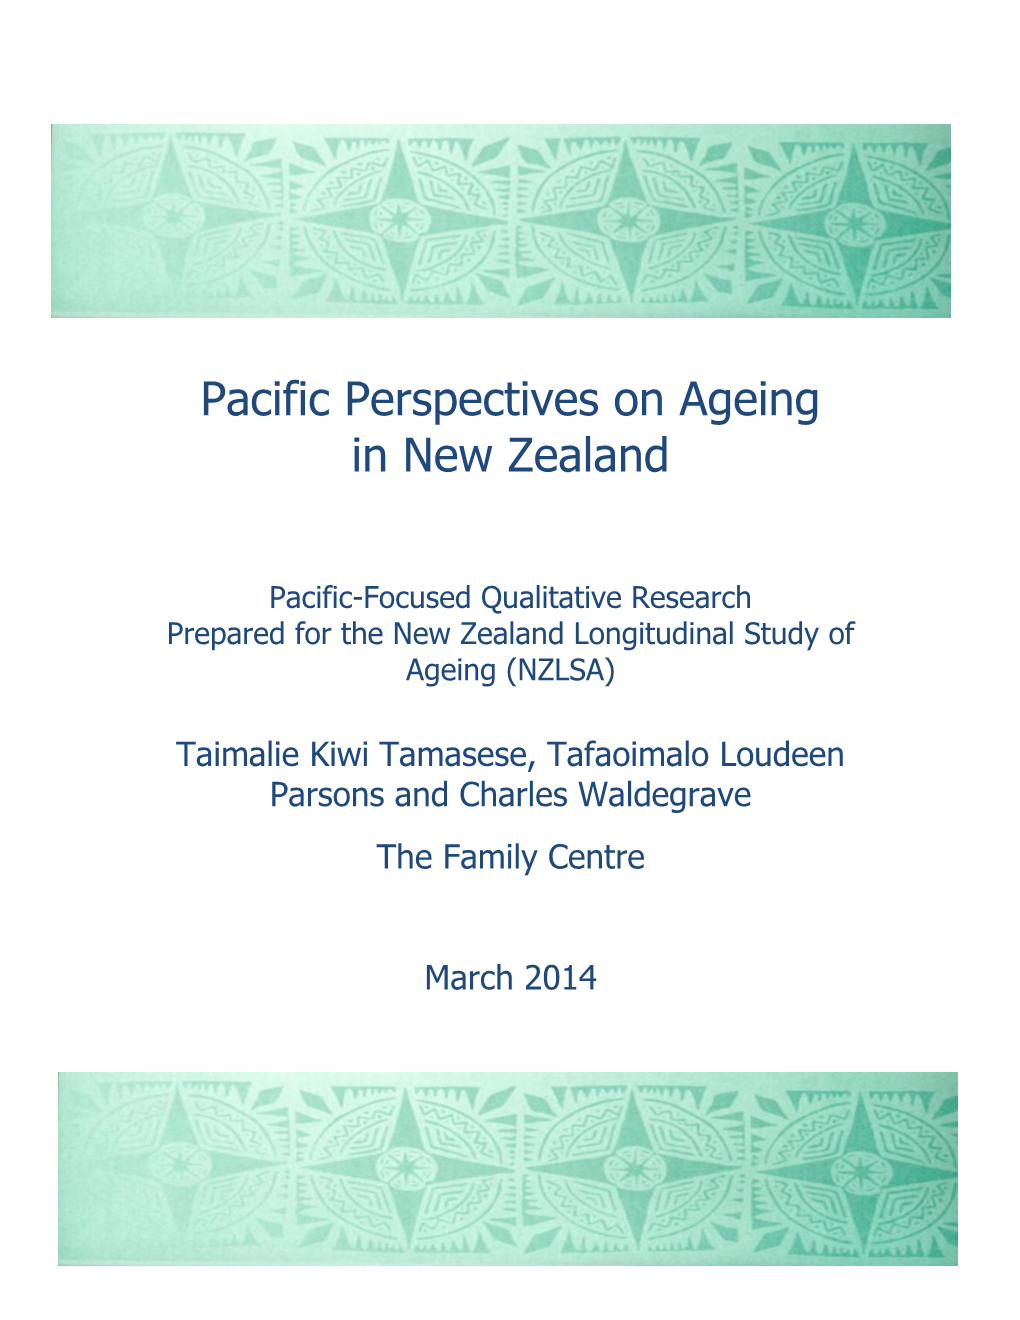 Pacific Perspectives on Ageing in New Zealand